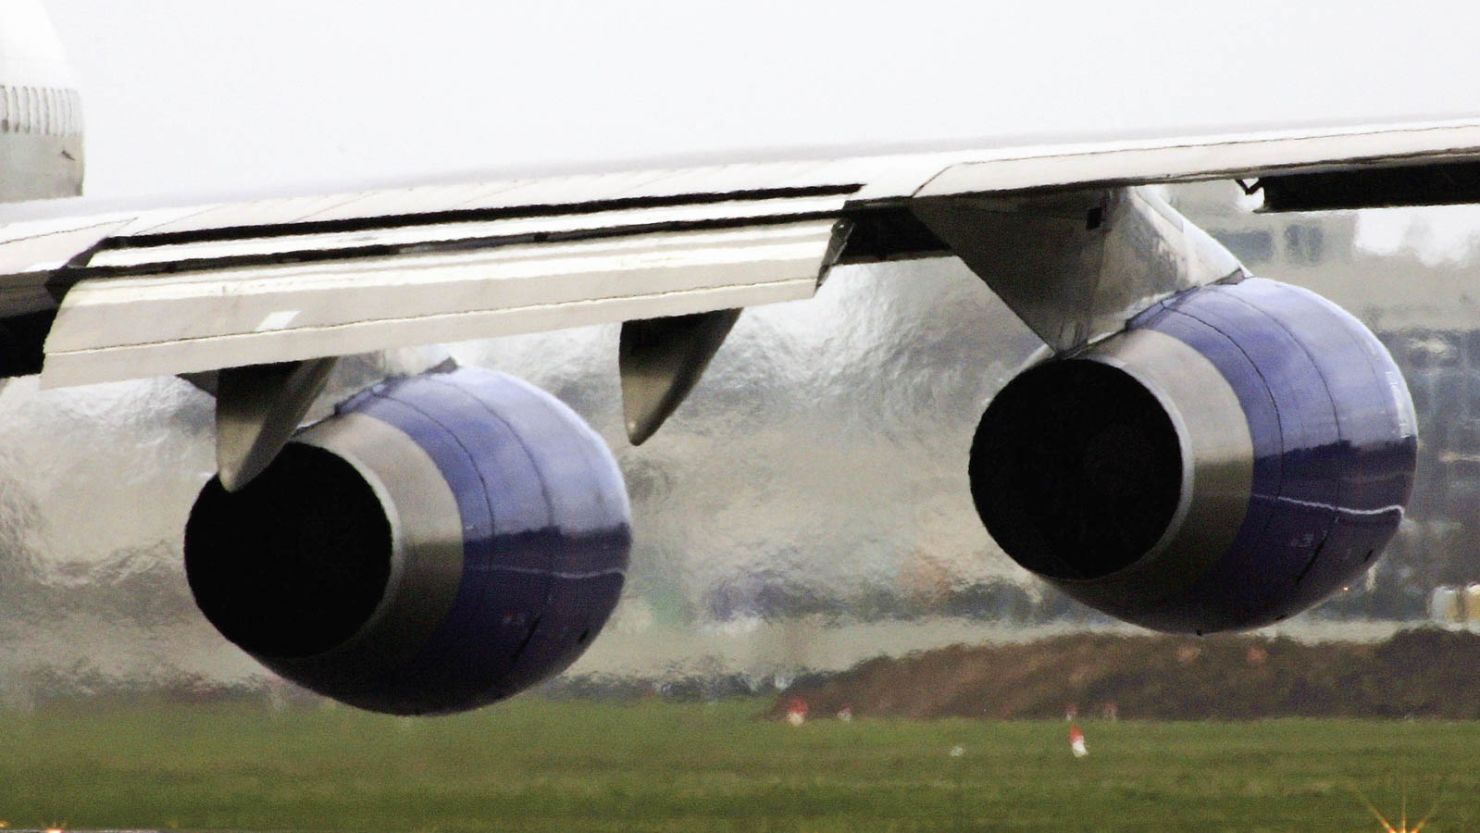 Aviation pollution is responsible for under 2.5% of greenhouse gases. 